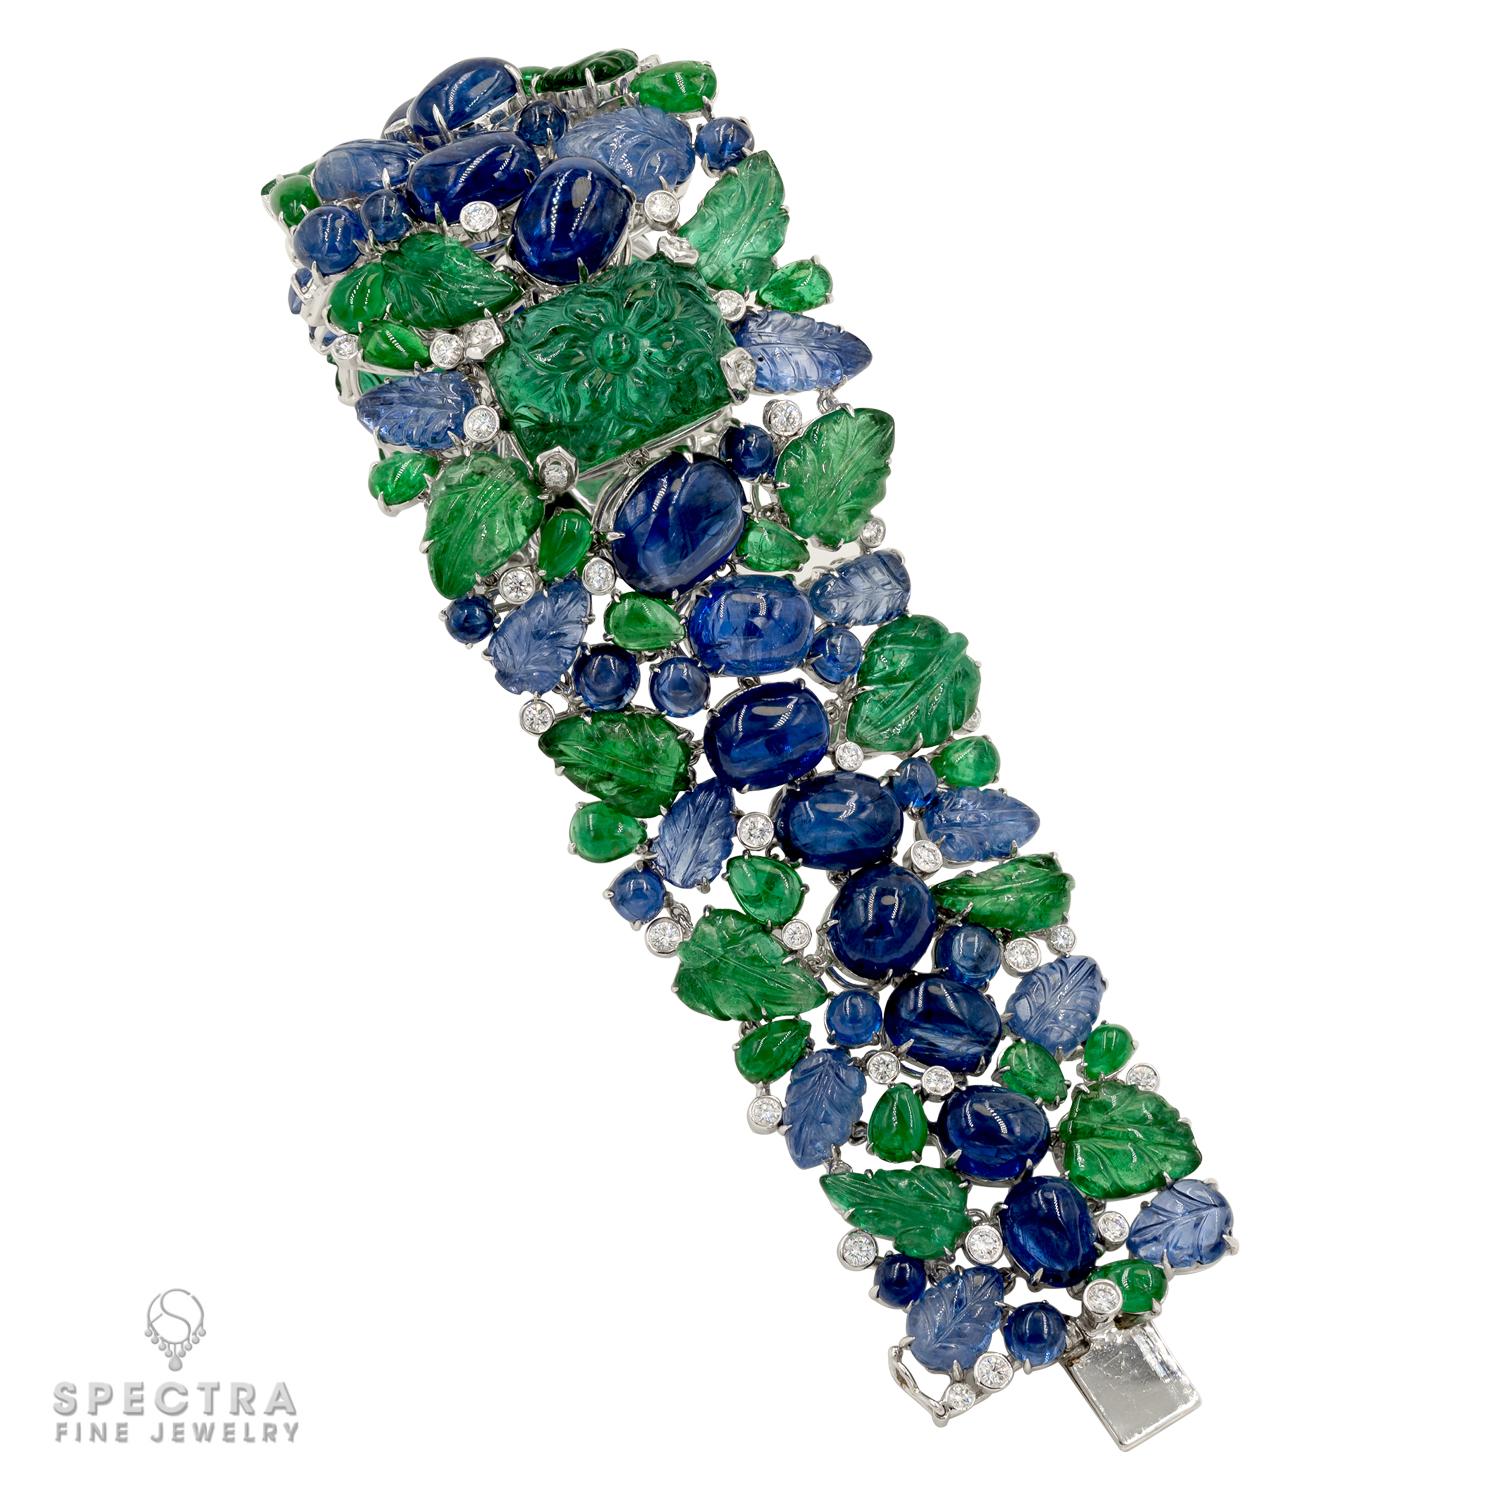 This vibrant Emerald Sapphire Diamond Bracelet made in the Contemporary Era, circa 2000s, is rich tapestry of spectacular gemstones. The 6.75-inch (17.15 cm) bracelet crafted in 18K white gold shows very little metal save for the mountings and